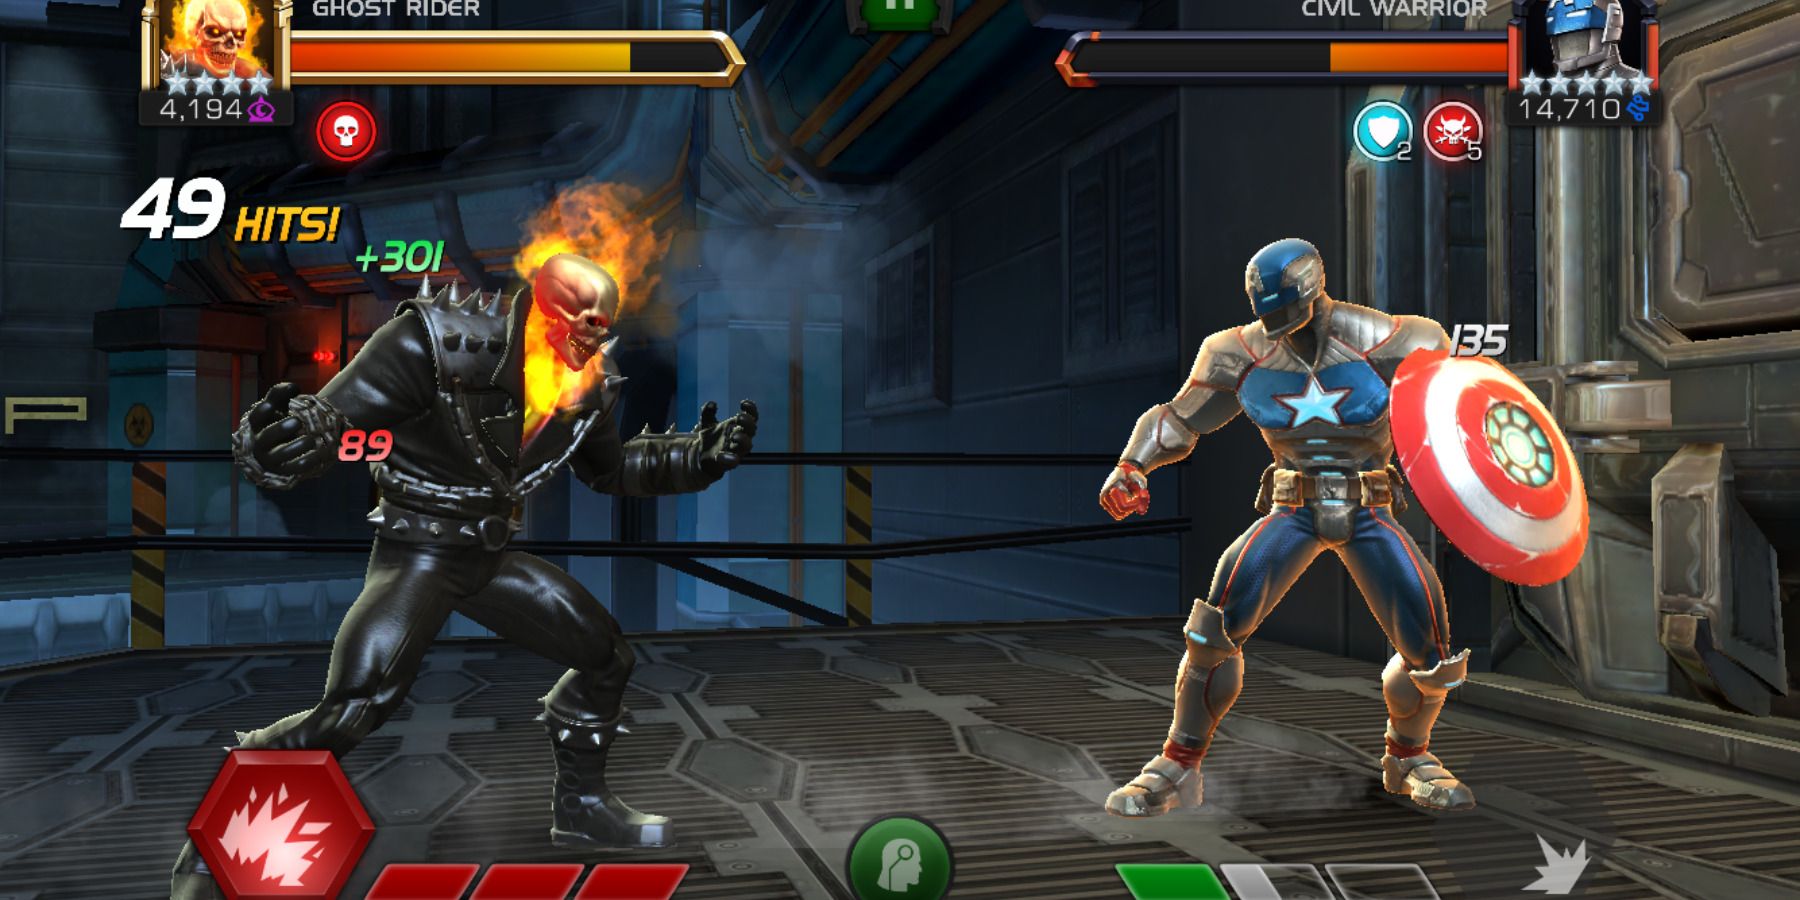 Ghost Rider fighting Civil Warrior in Marvel Contest of Champions.